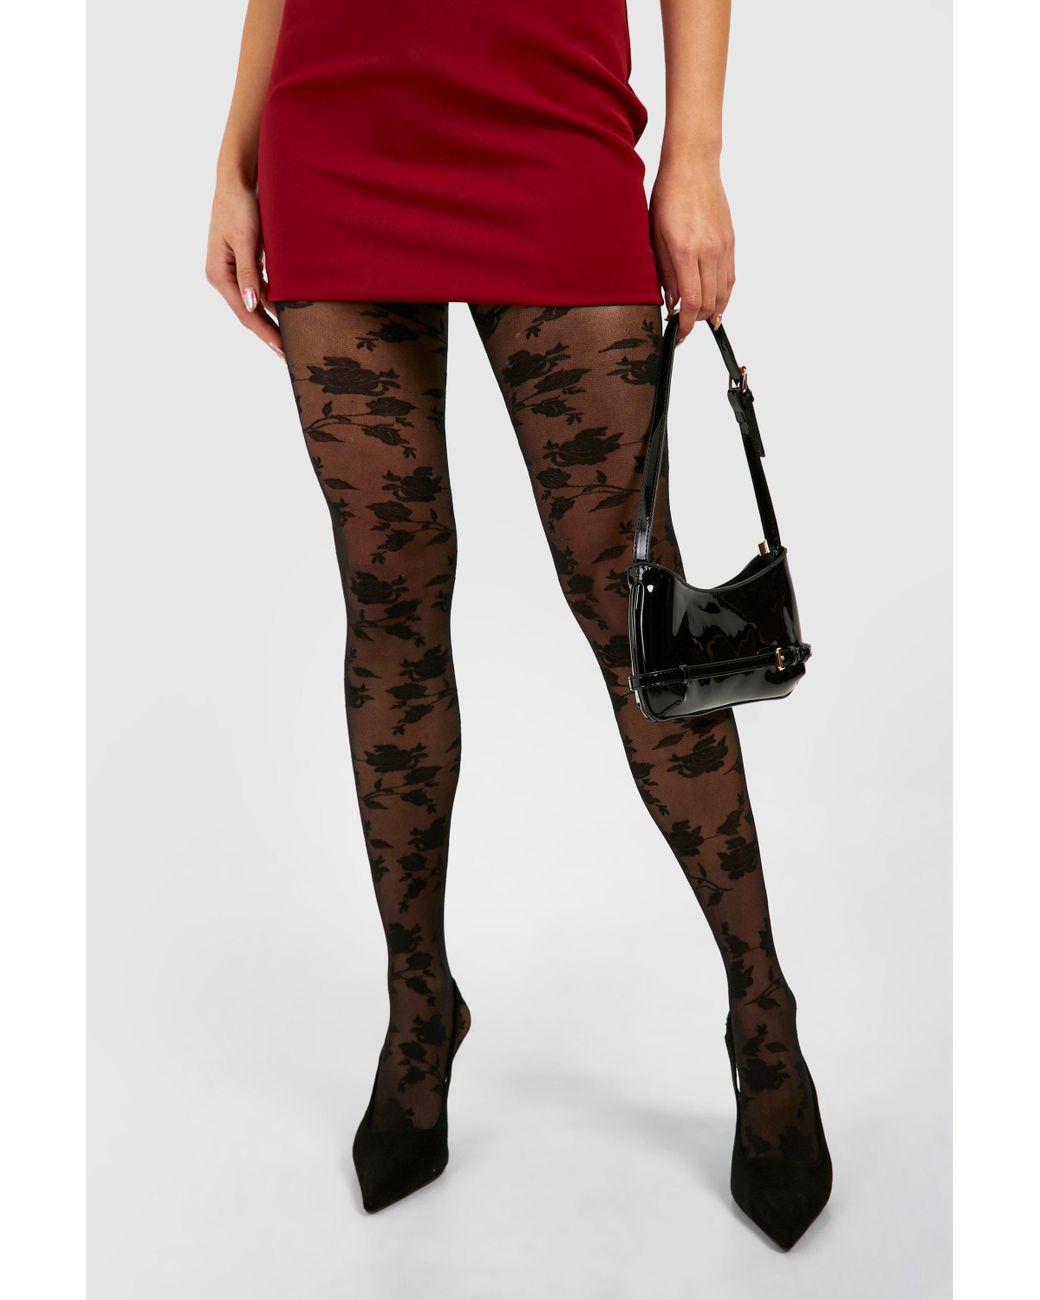 Boohoo Floral Lace Fishnet Tights in Red